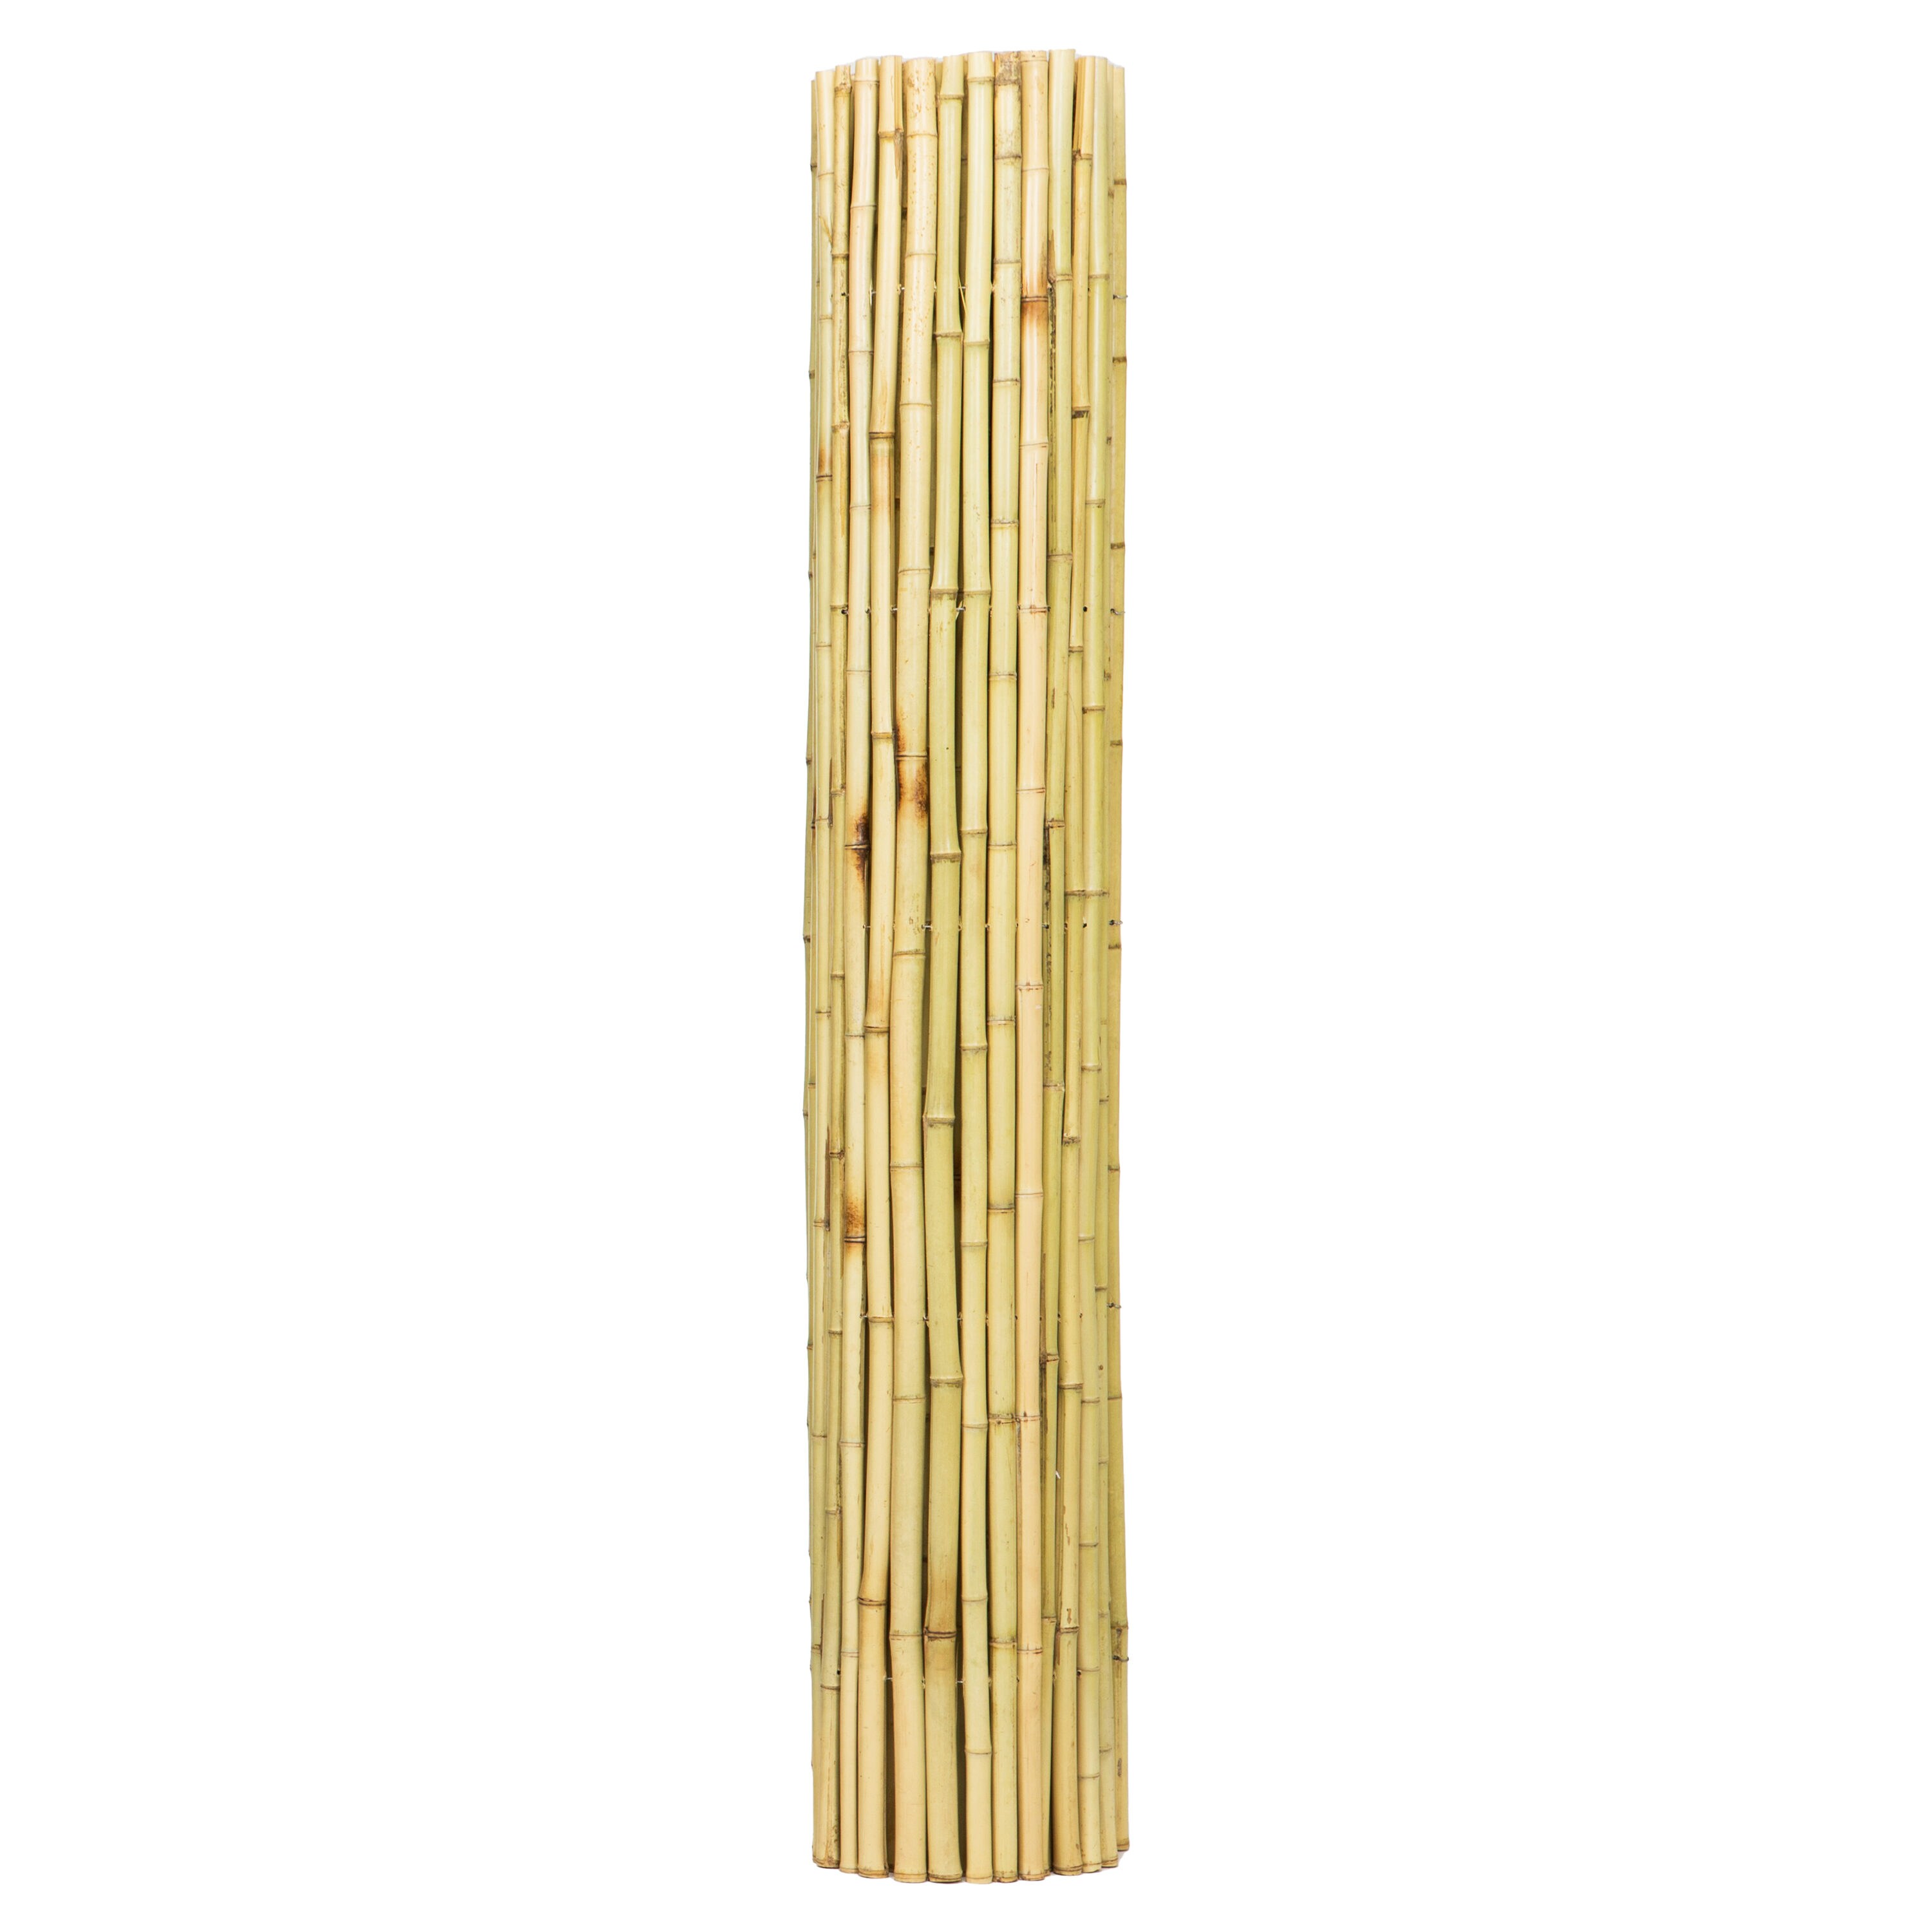 Backyard X-Scapes 16-ft x 6-ft 0.75-Gauge Brown Wood Bamboo